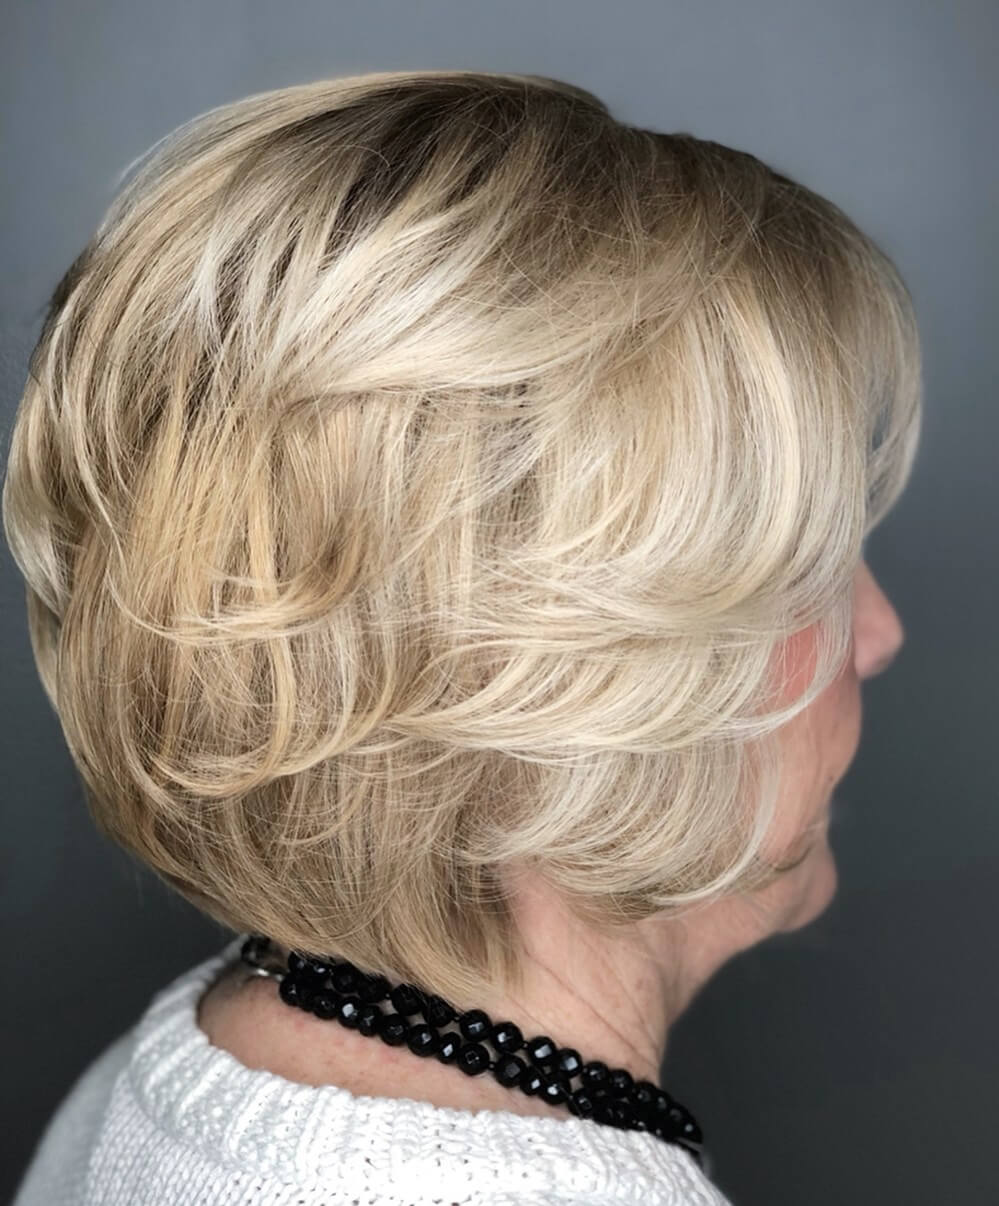 Hairstyles for Women Over 50